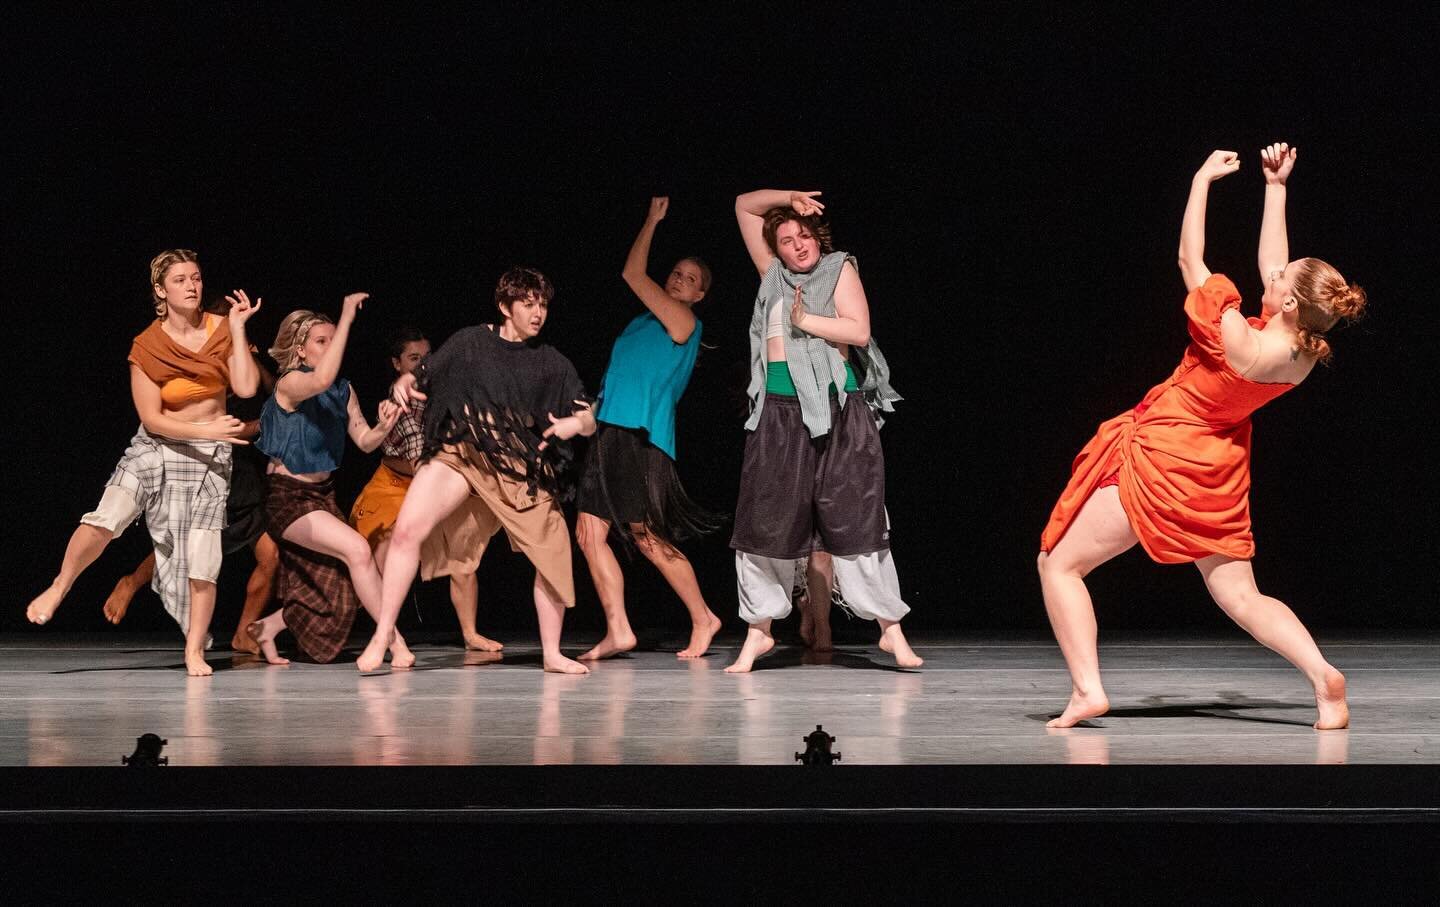 I had the pleasure of collaborating with @jessezaritt and these wonderful dancers this past semester at @uartsschoolofdance on a piece called Still | Life 🩶 Thank you all for a beautiful process!

📷 - @stephaniebergerphotography